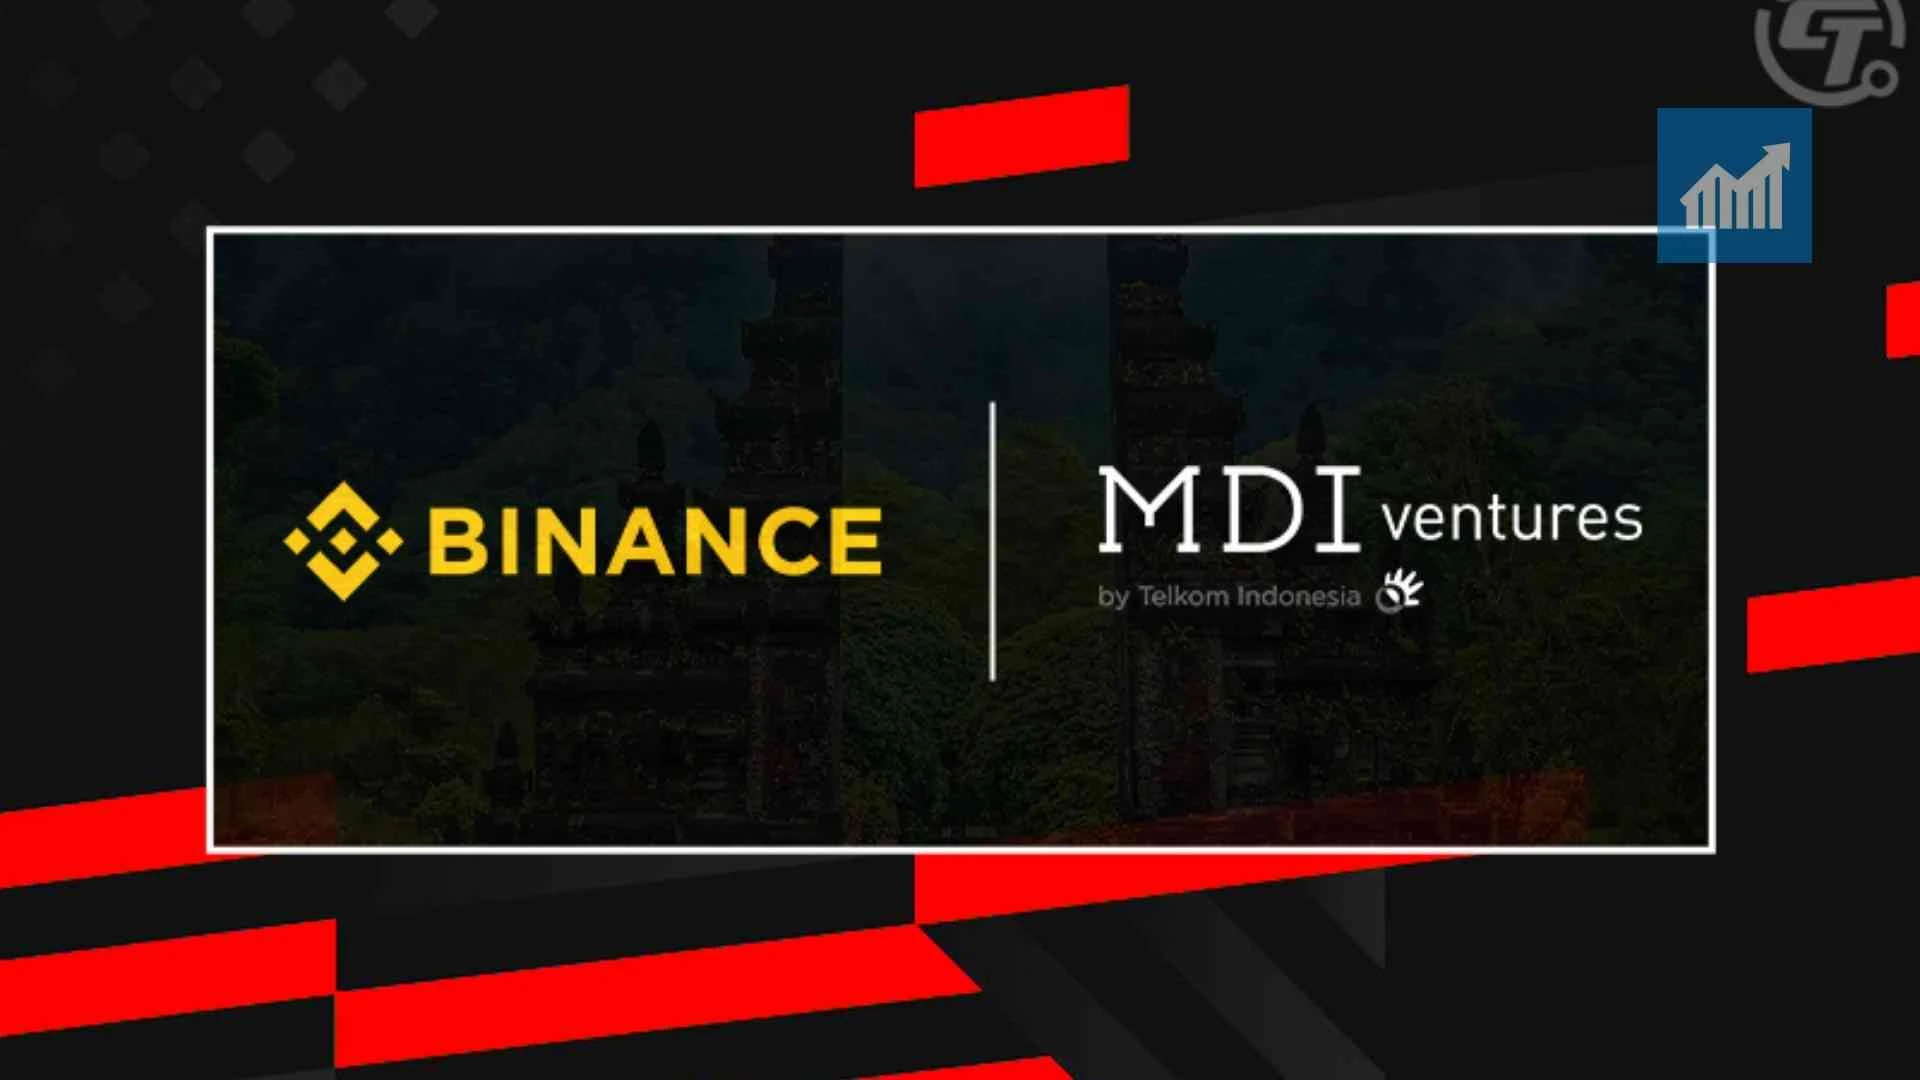 Formation of a consortium led by Binance and MDI Ventures to develop blockchain ecosystem in Indonesia